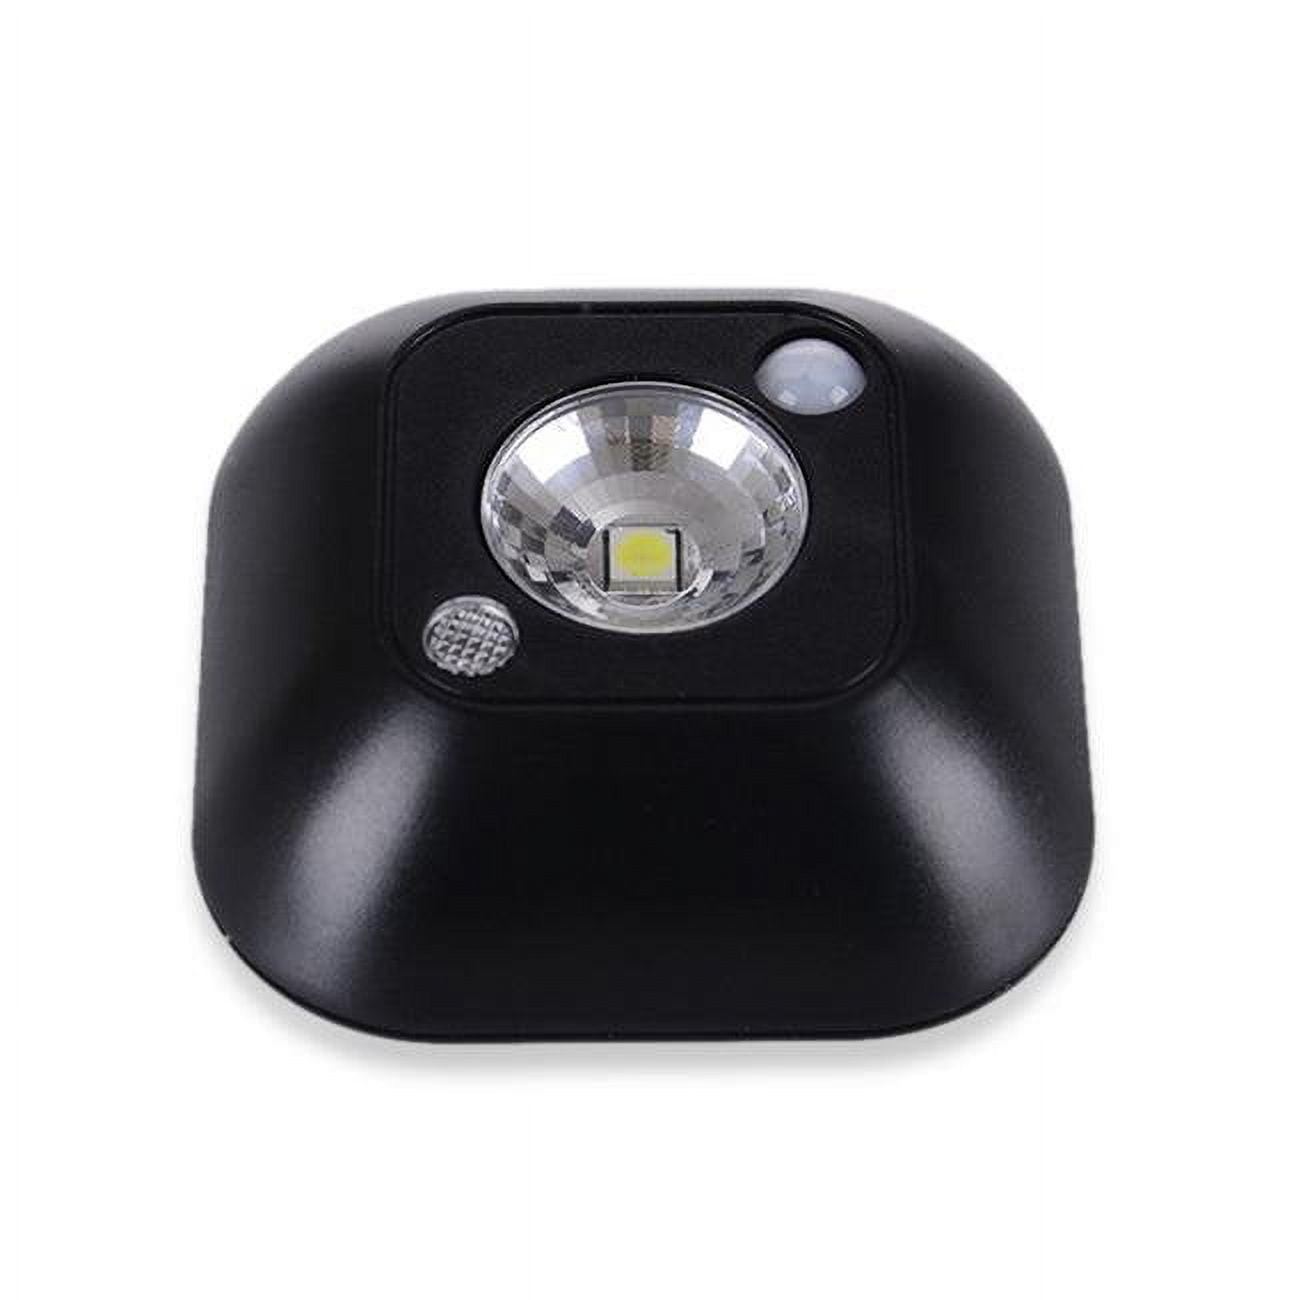 Picture of 3P Experts Wireless Motion Sensor Led Light Detector  Black - Pack of 2       